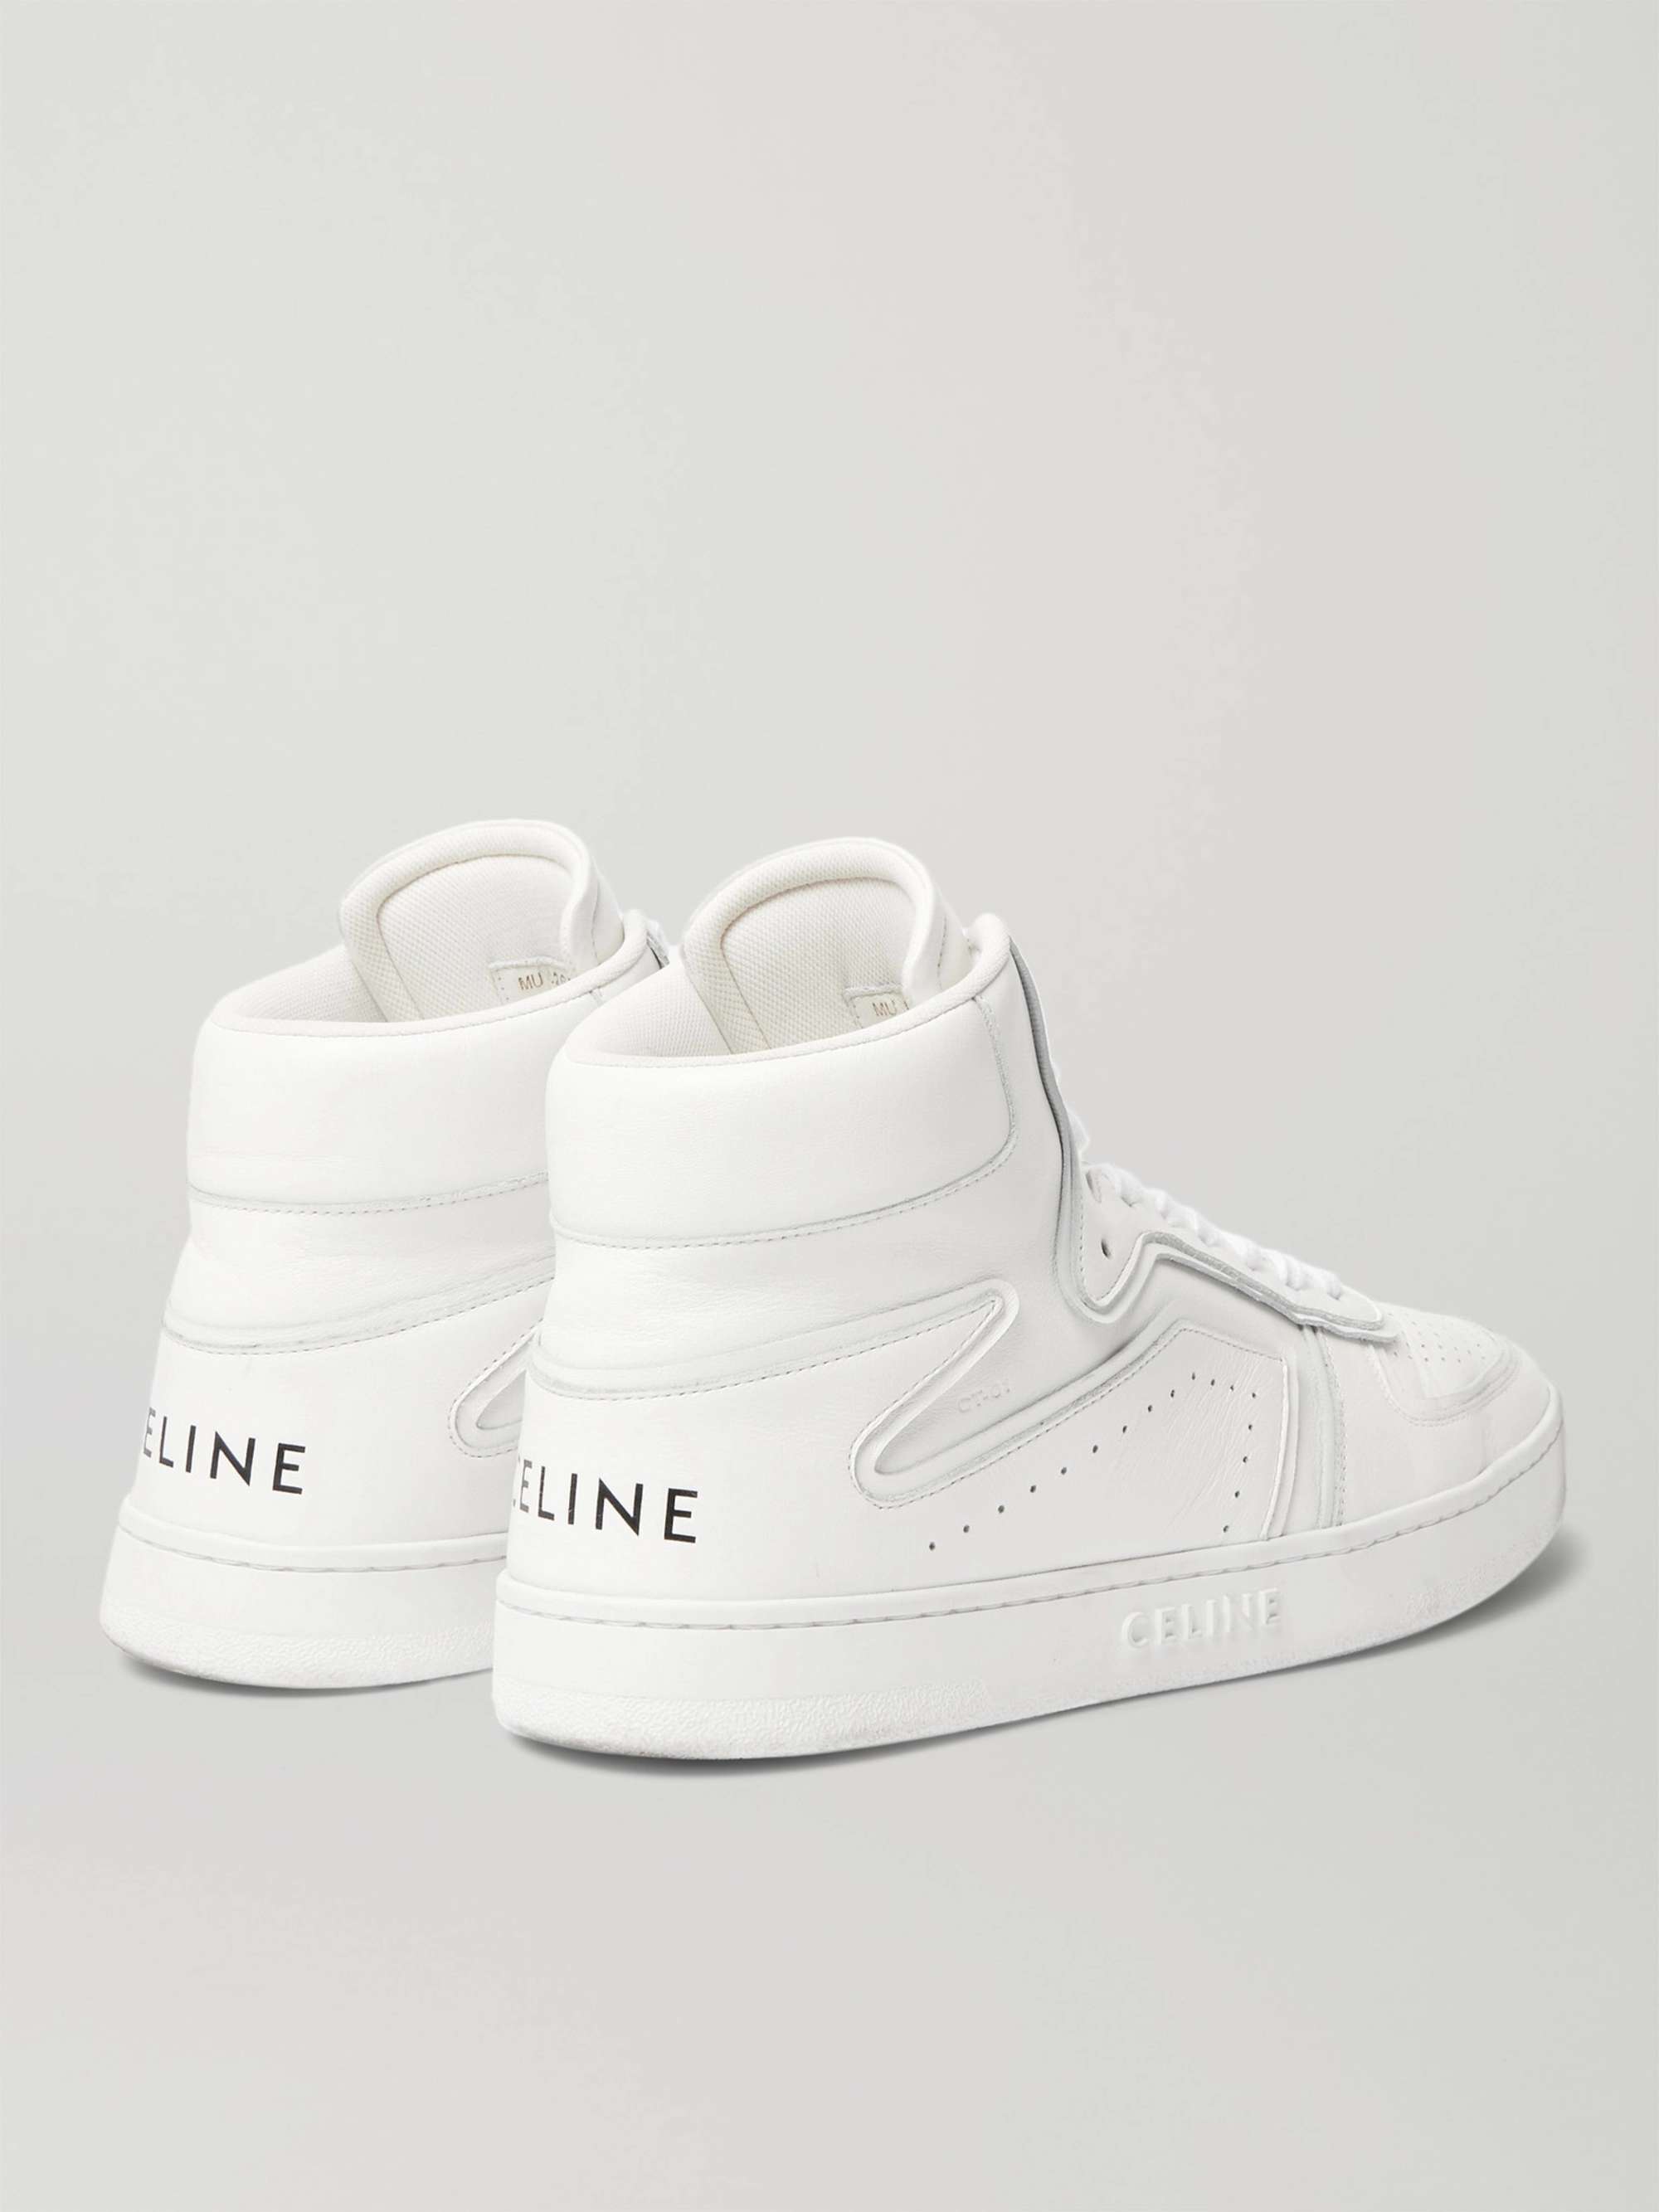 stay Upstream notice CELINE HOMME Z Leather High-Top Sneakers | MR PORTER